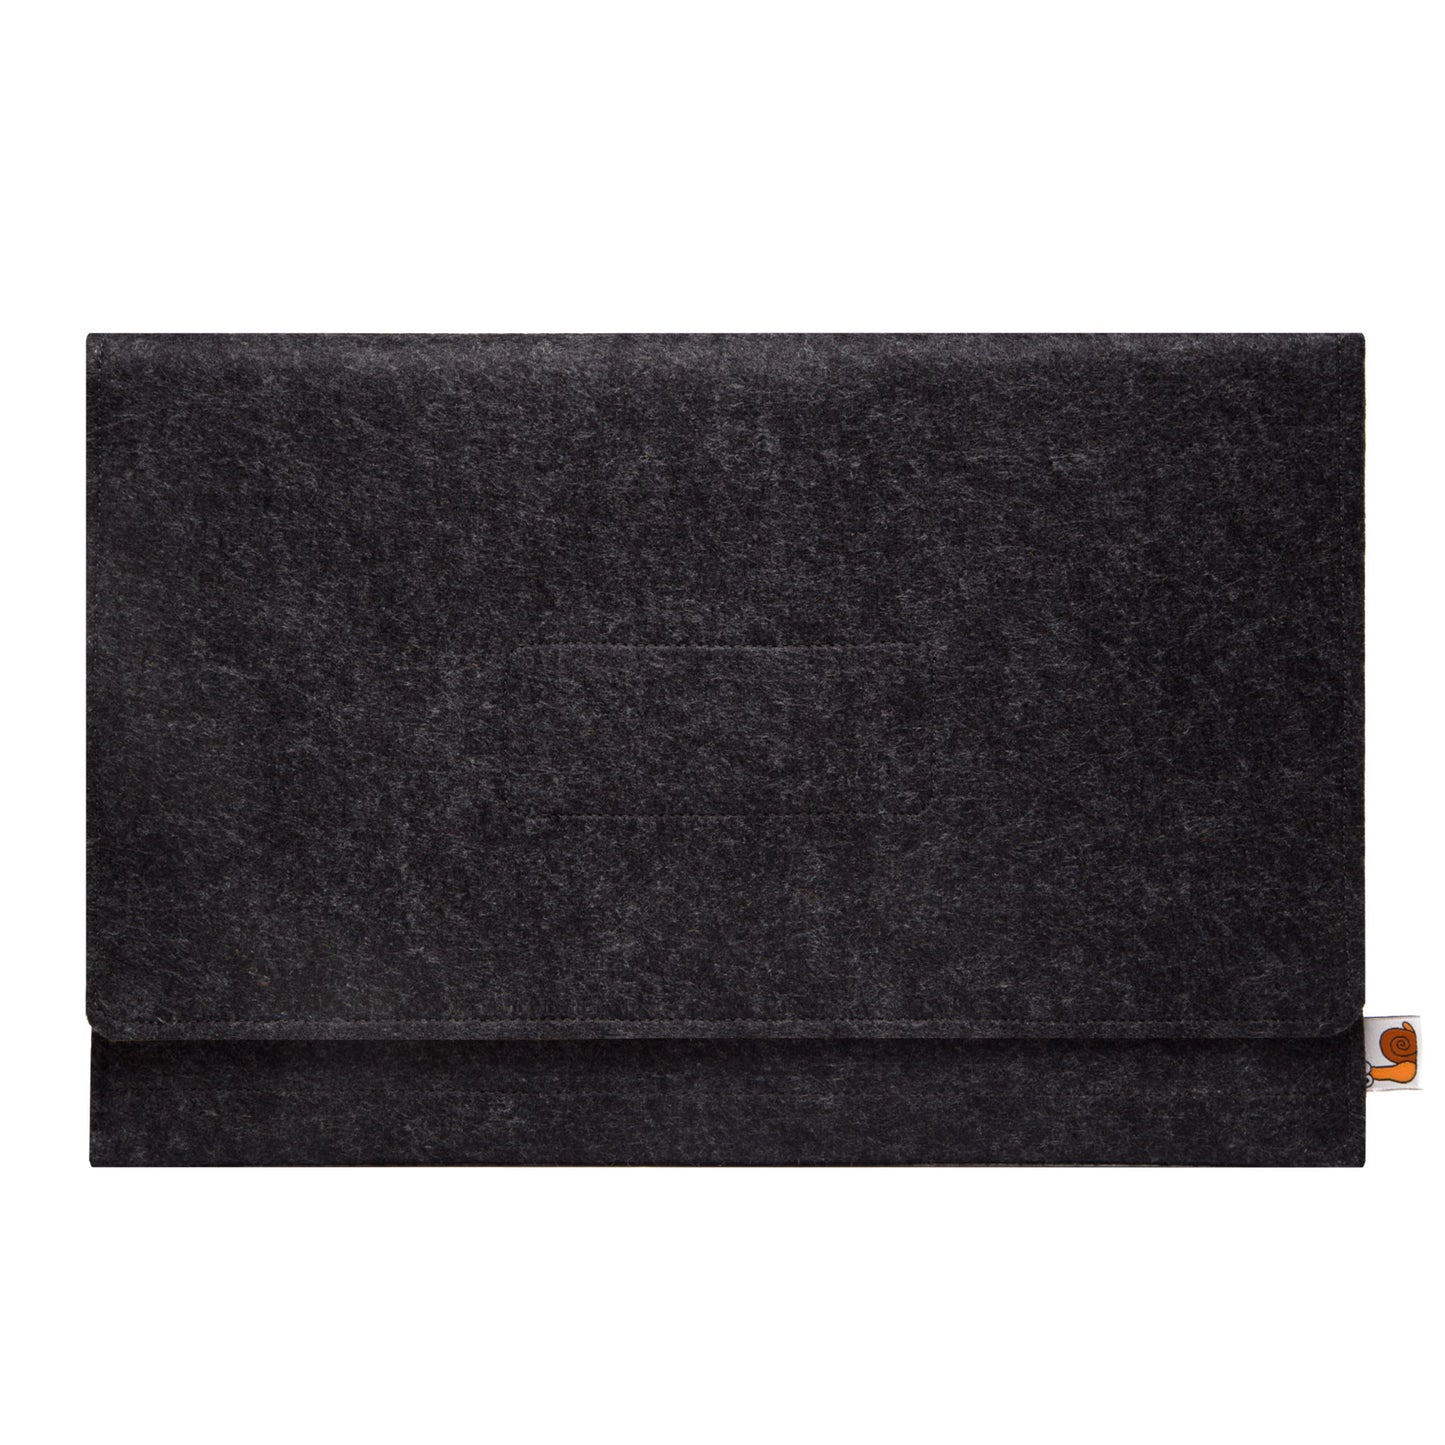 Premium Felt iPad Cover: Ultimate Protection with Accessories Pocket - Charcoal & Dark Golden Rot